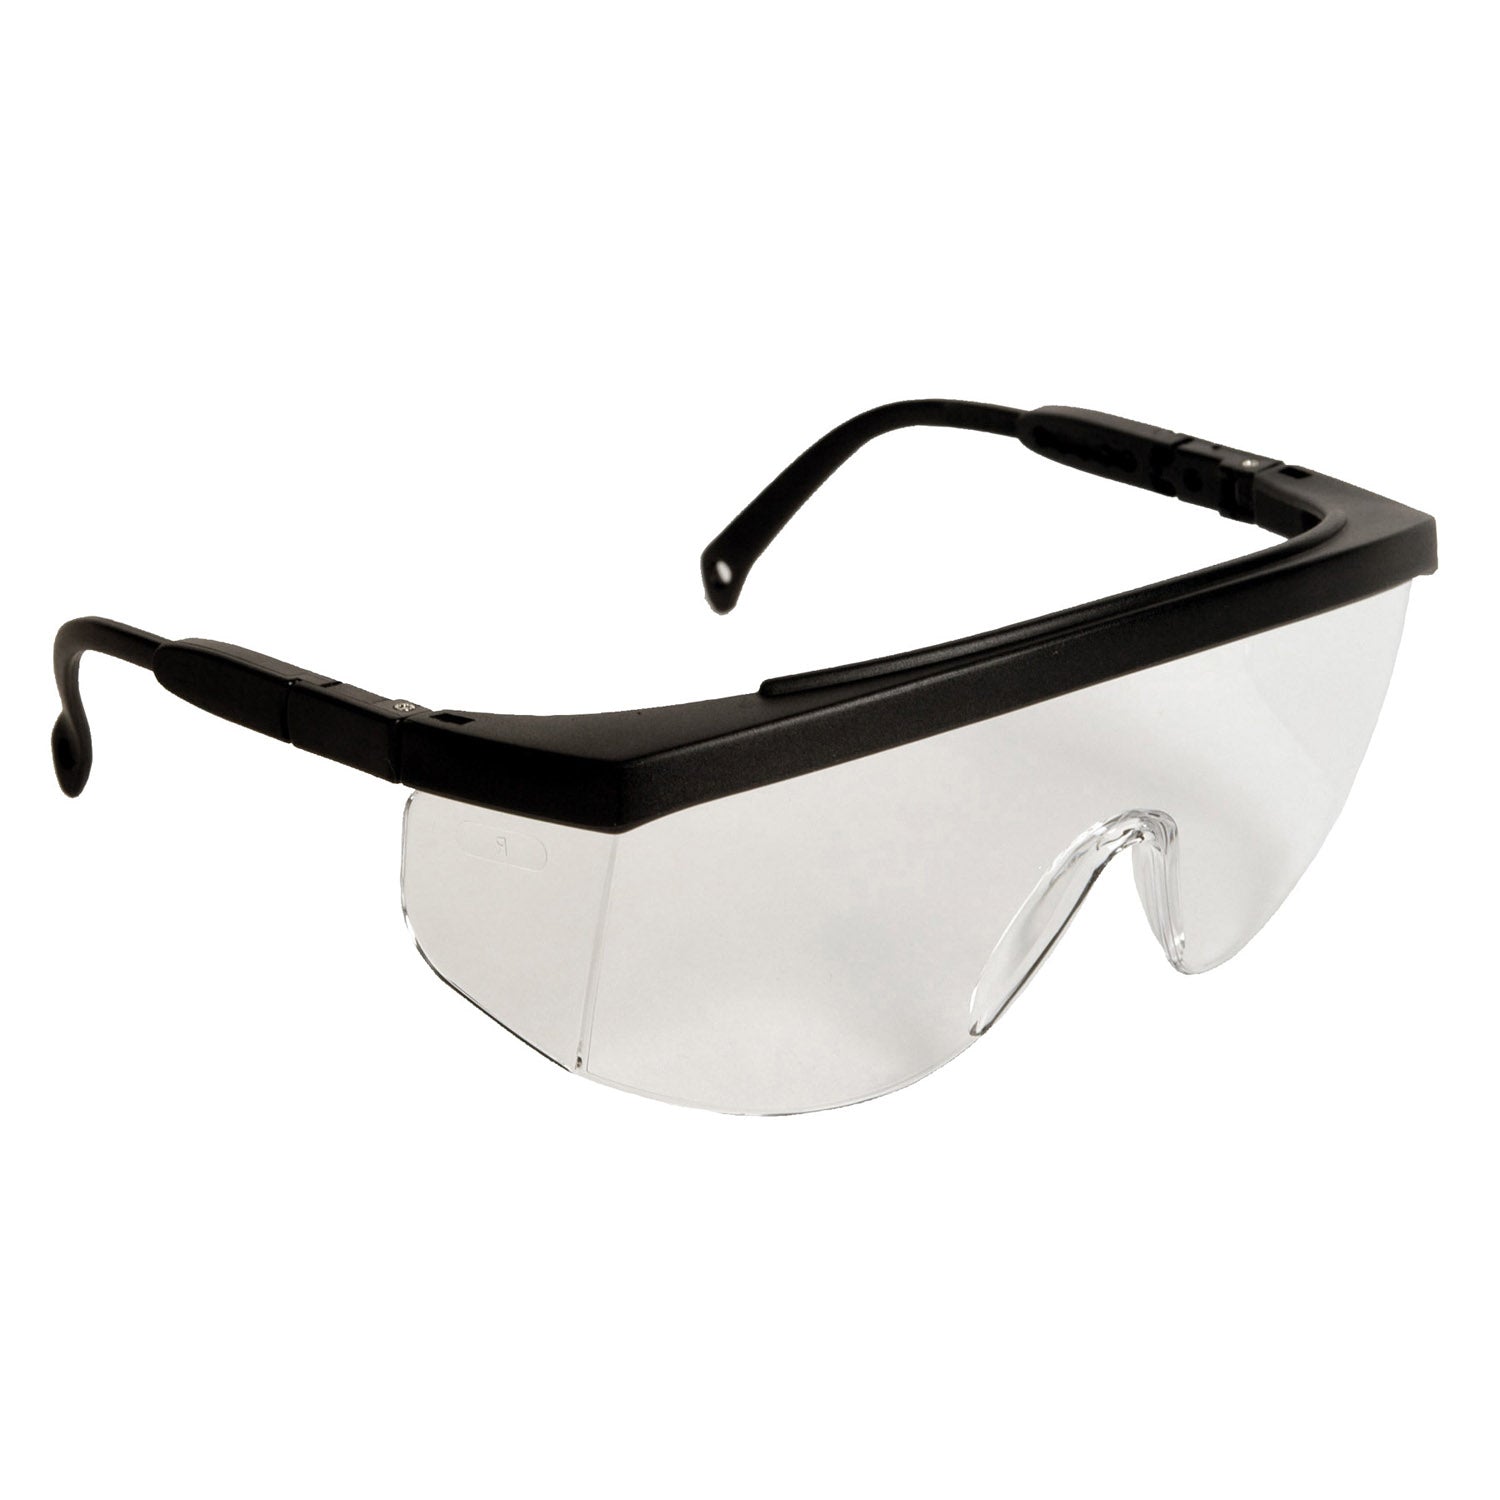 G4 OTG Safety Glasses 5 Position Ratcheting Temples (Box of 12)